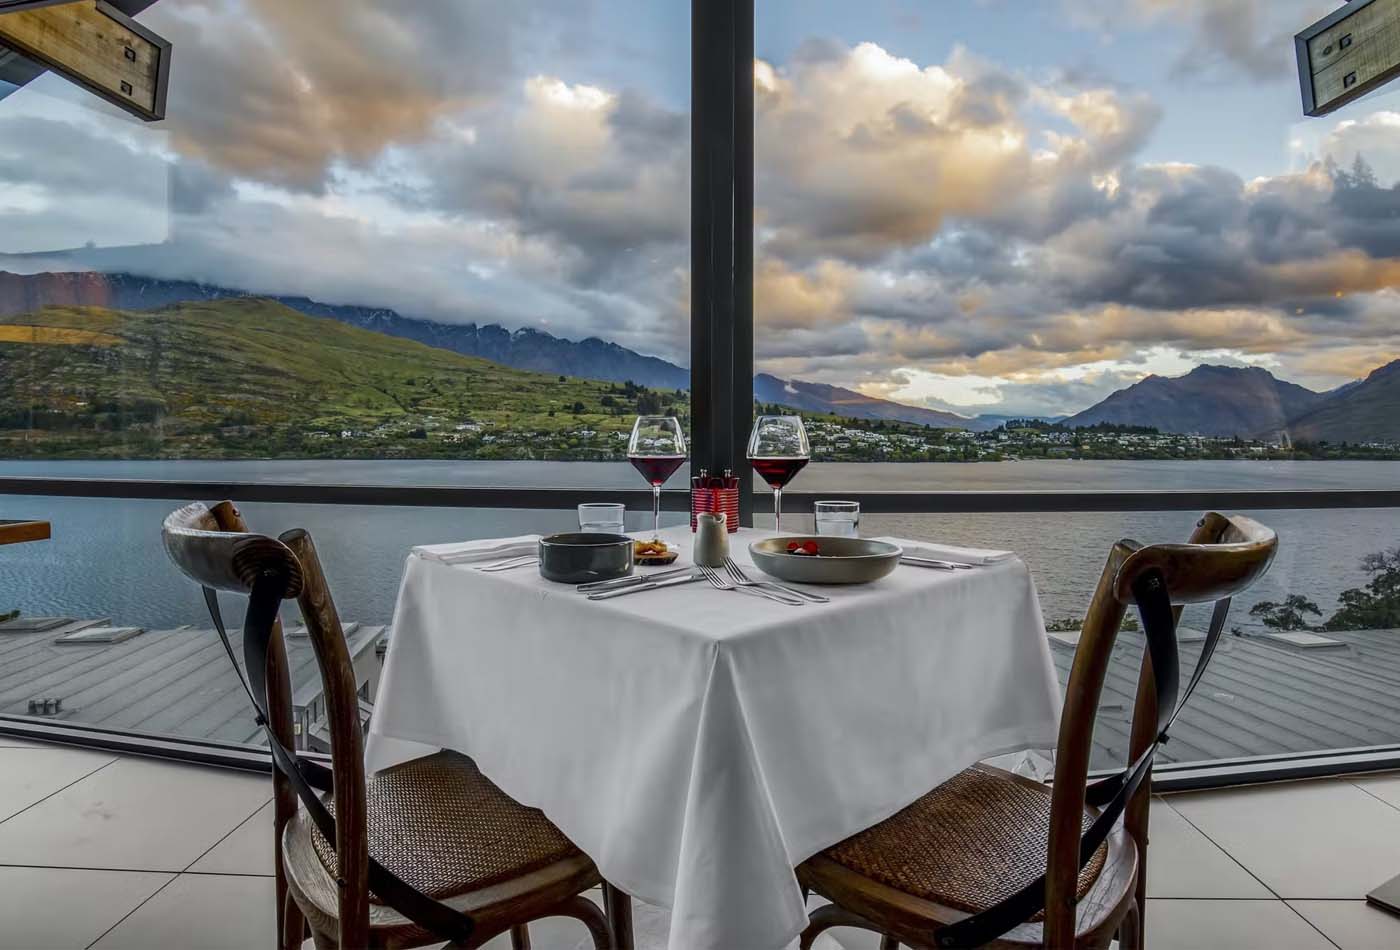 Set dining table overlooking a lake and mountains